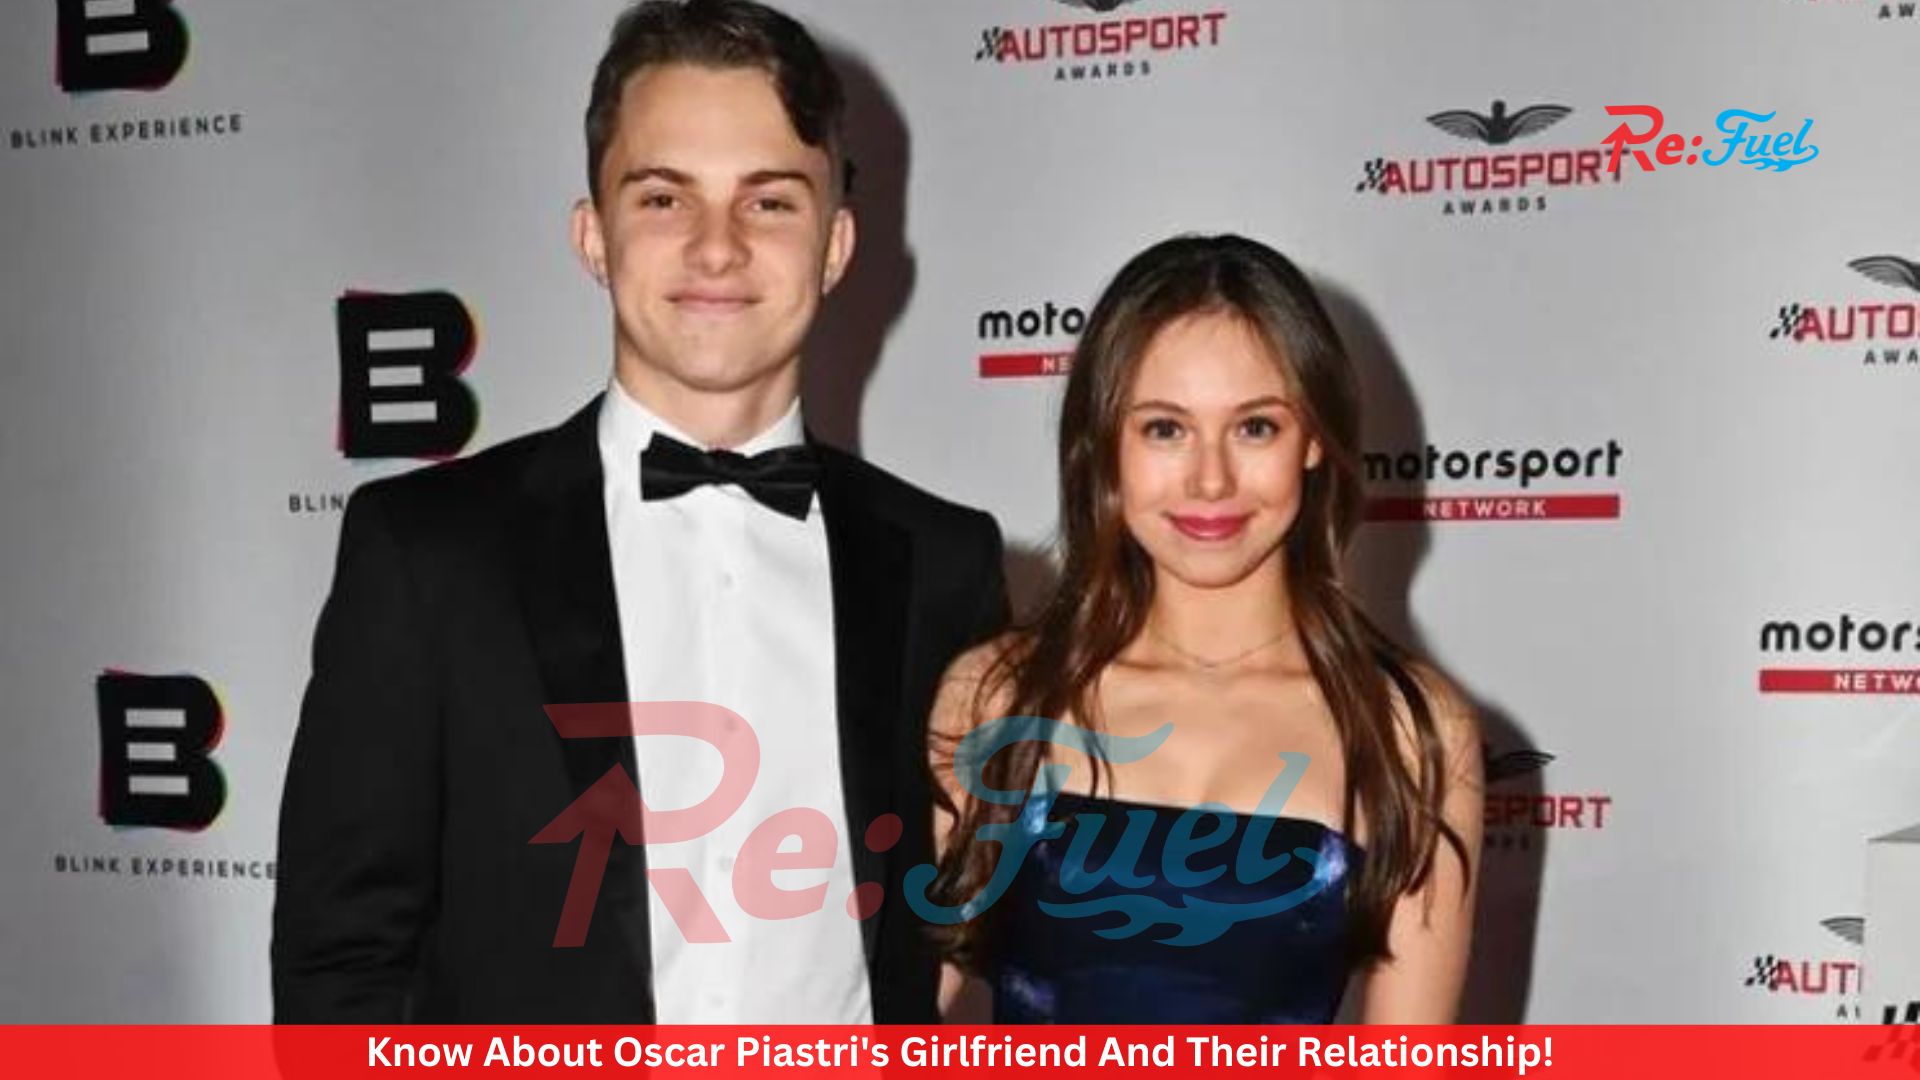 Know About Oscar Piastri's Girlfriend And Their Relationship!